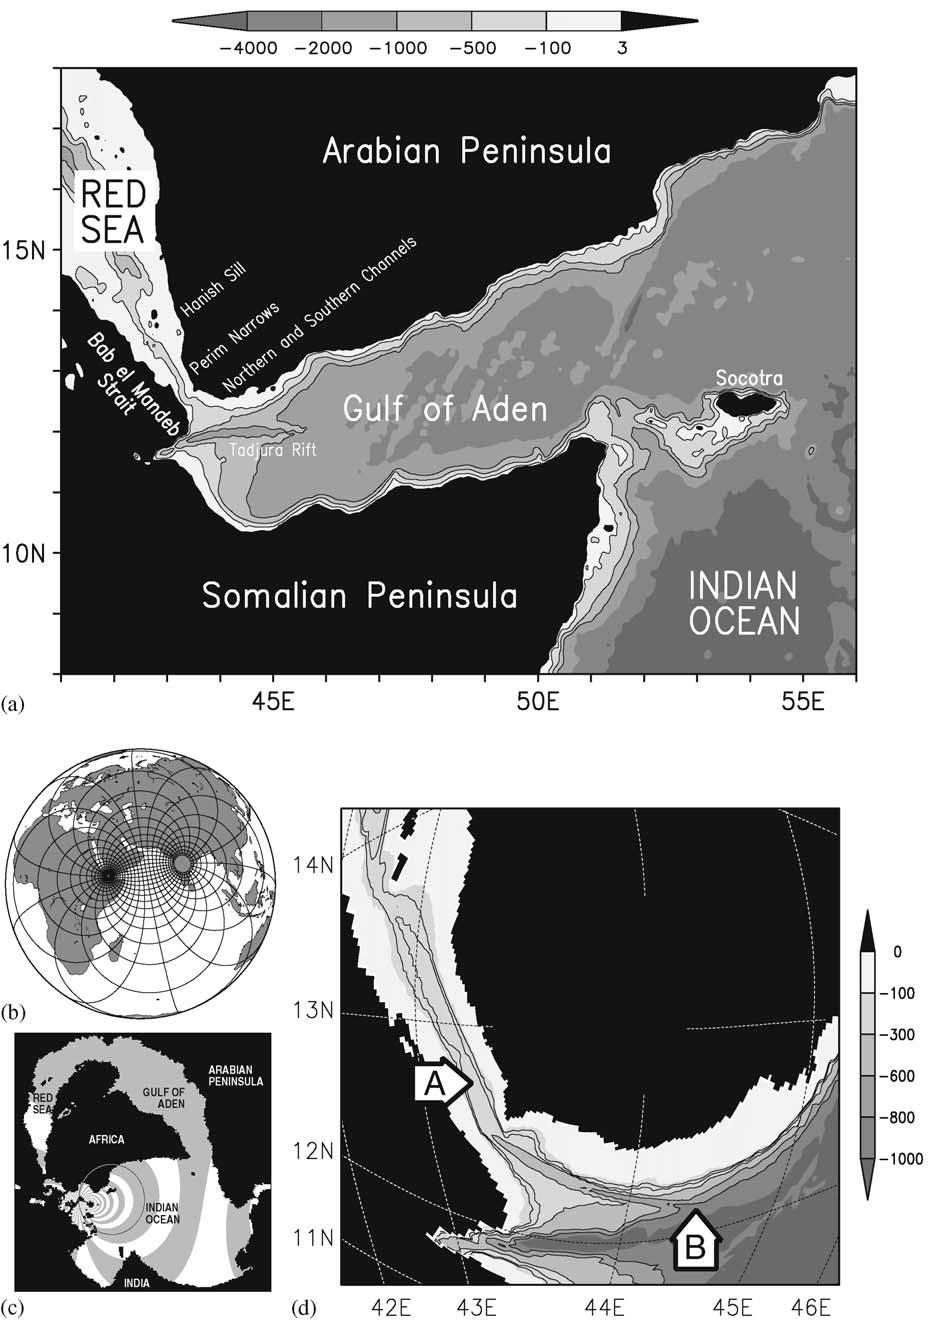 H. Aiki et al. / Continental Shelf Research 26 (2006) 1448 1468 1449 Fig. 1. (a) Bathymetry of the region from the Red Sea to the Indian Ocean. Contours show bottom depths of 100, 500, and 1000 m.